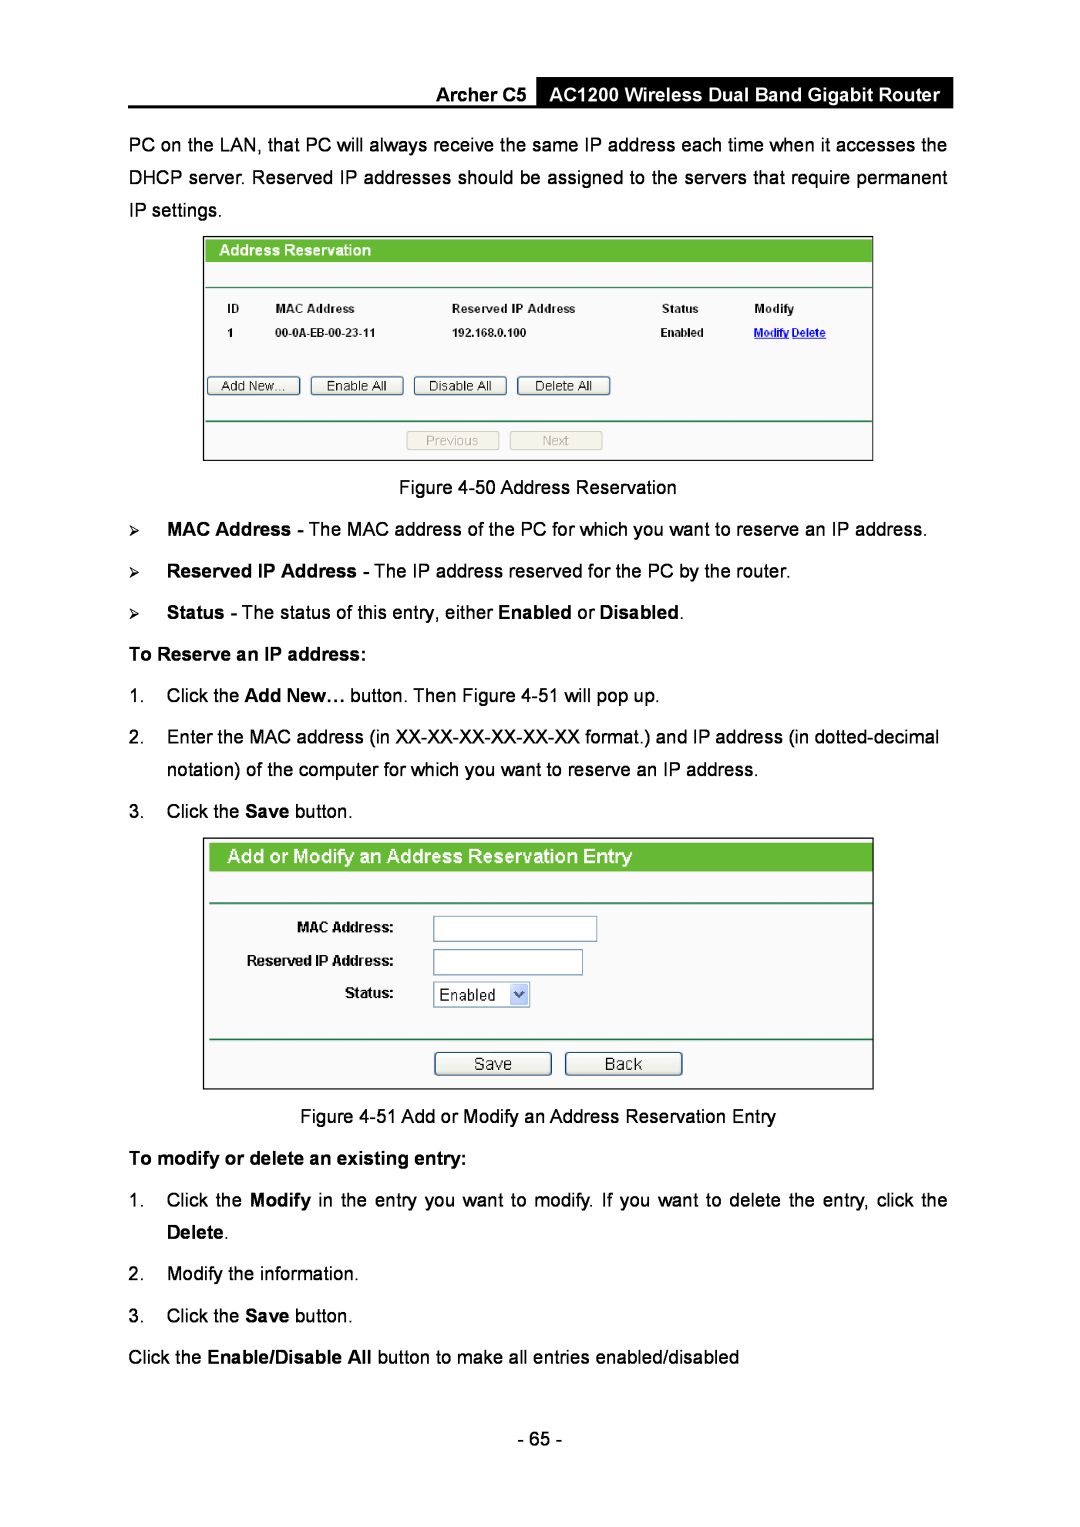 TP-Link manual To Reserve an IP address, Archer C5 AC1200 Wireless Dual Band Gigabit Router 